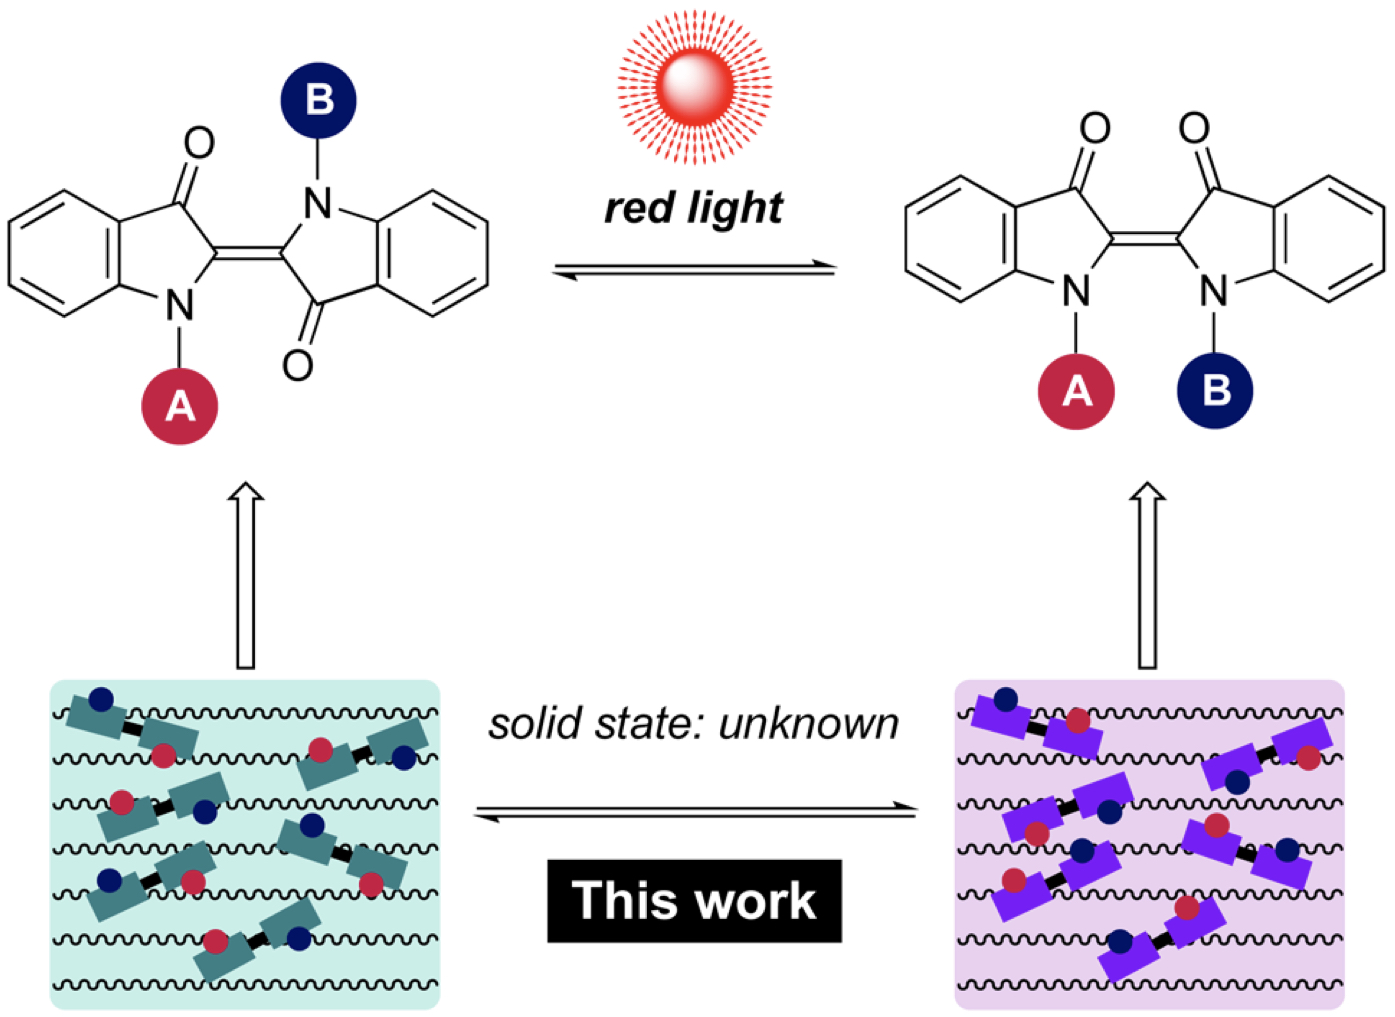 Red-light photoswitching of indigos in polymer thin films